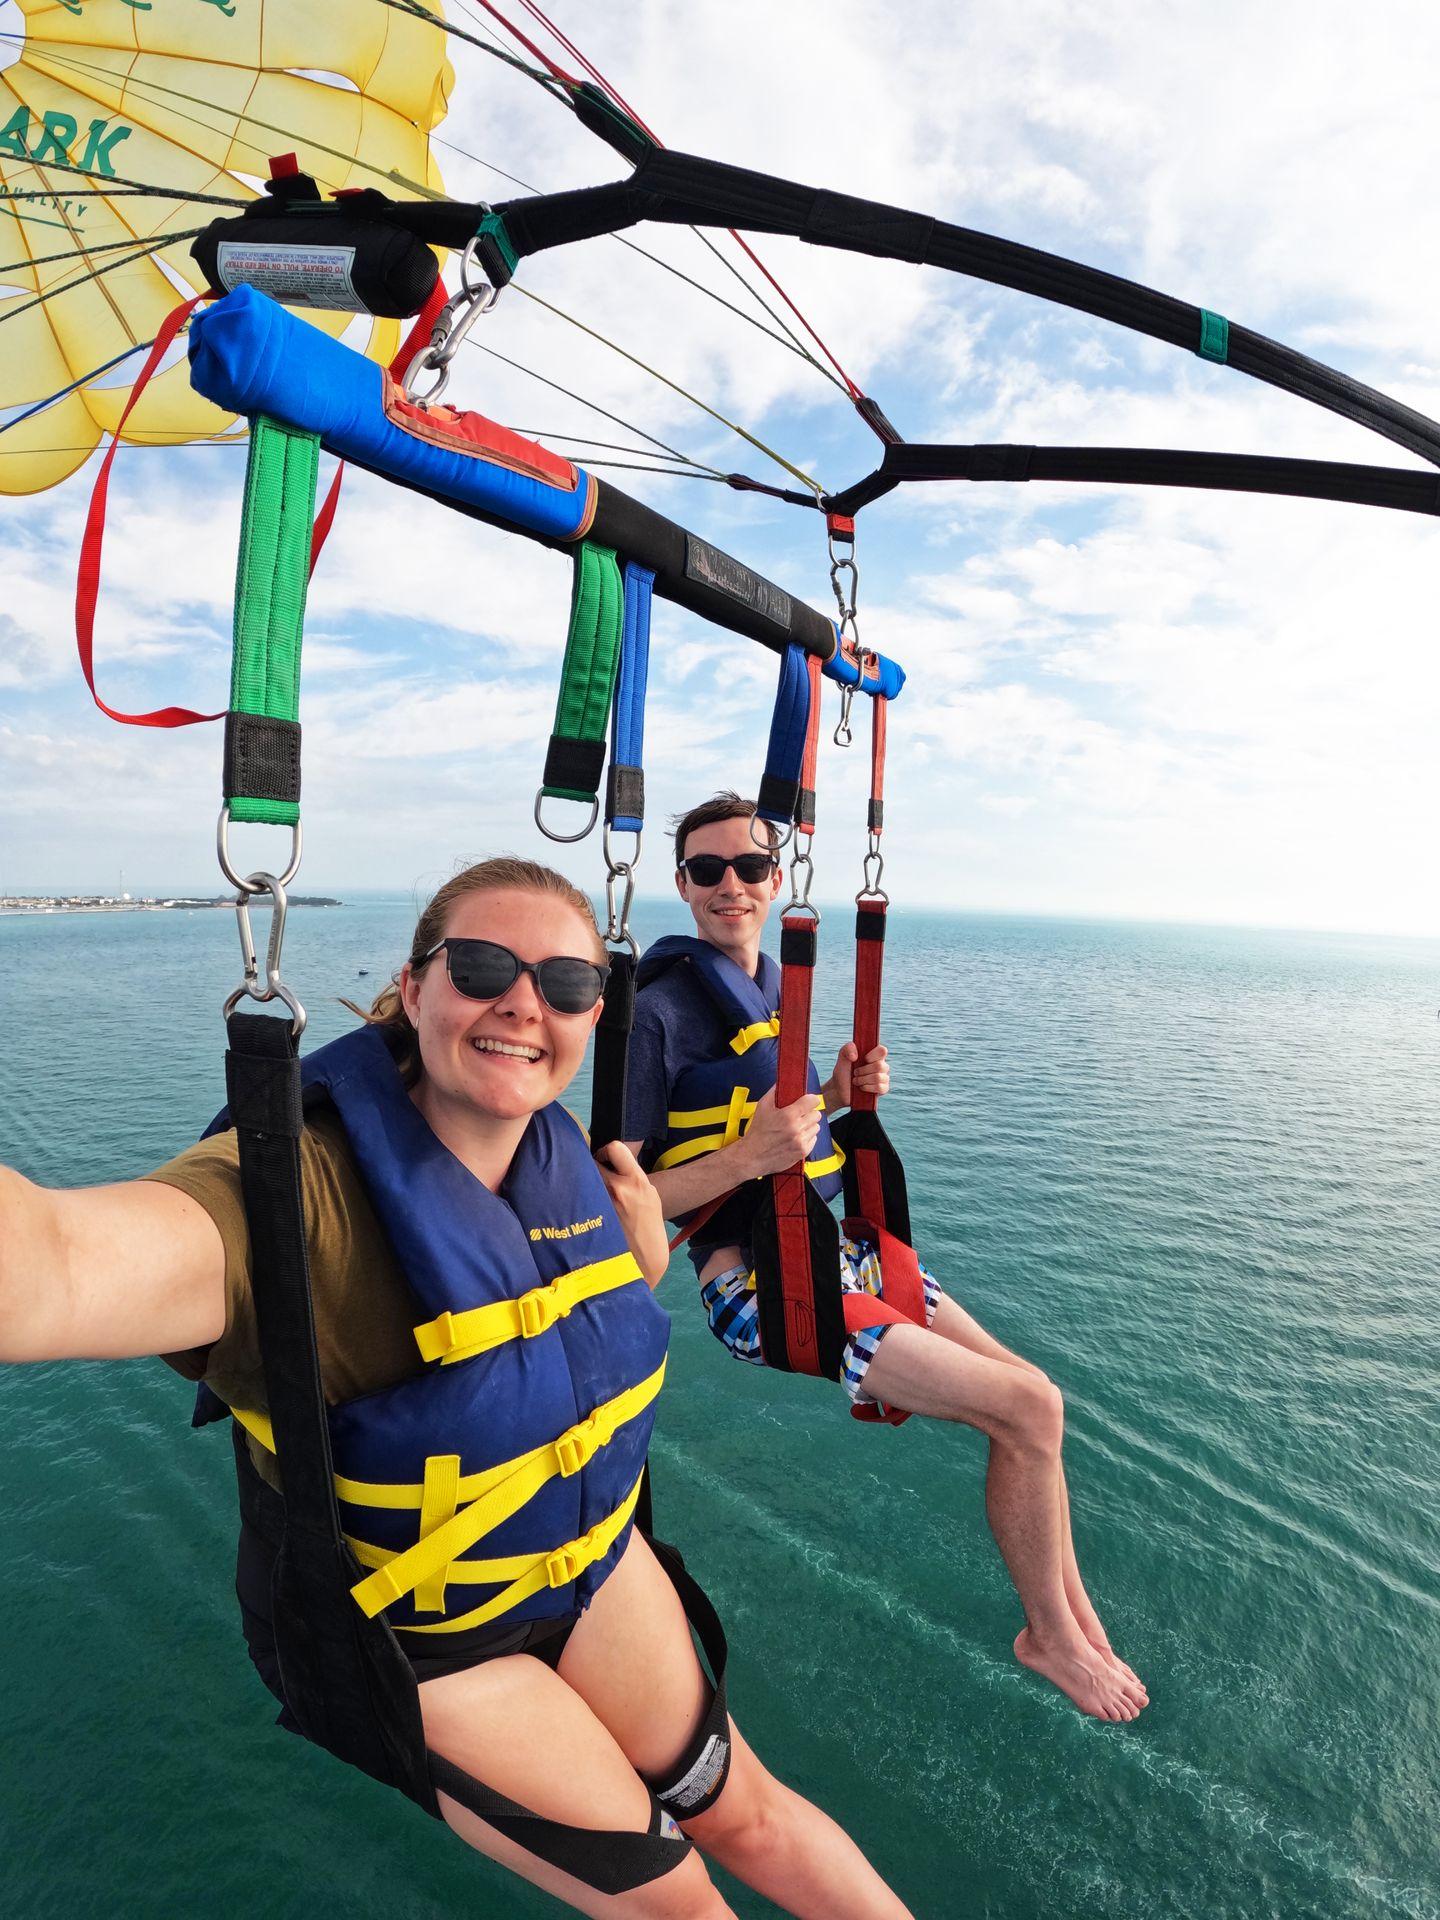 Lydia and Joe sitting up in the sky while parasailing. They are harnessed in and wearing life jackets